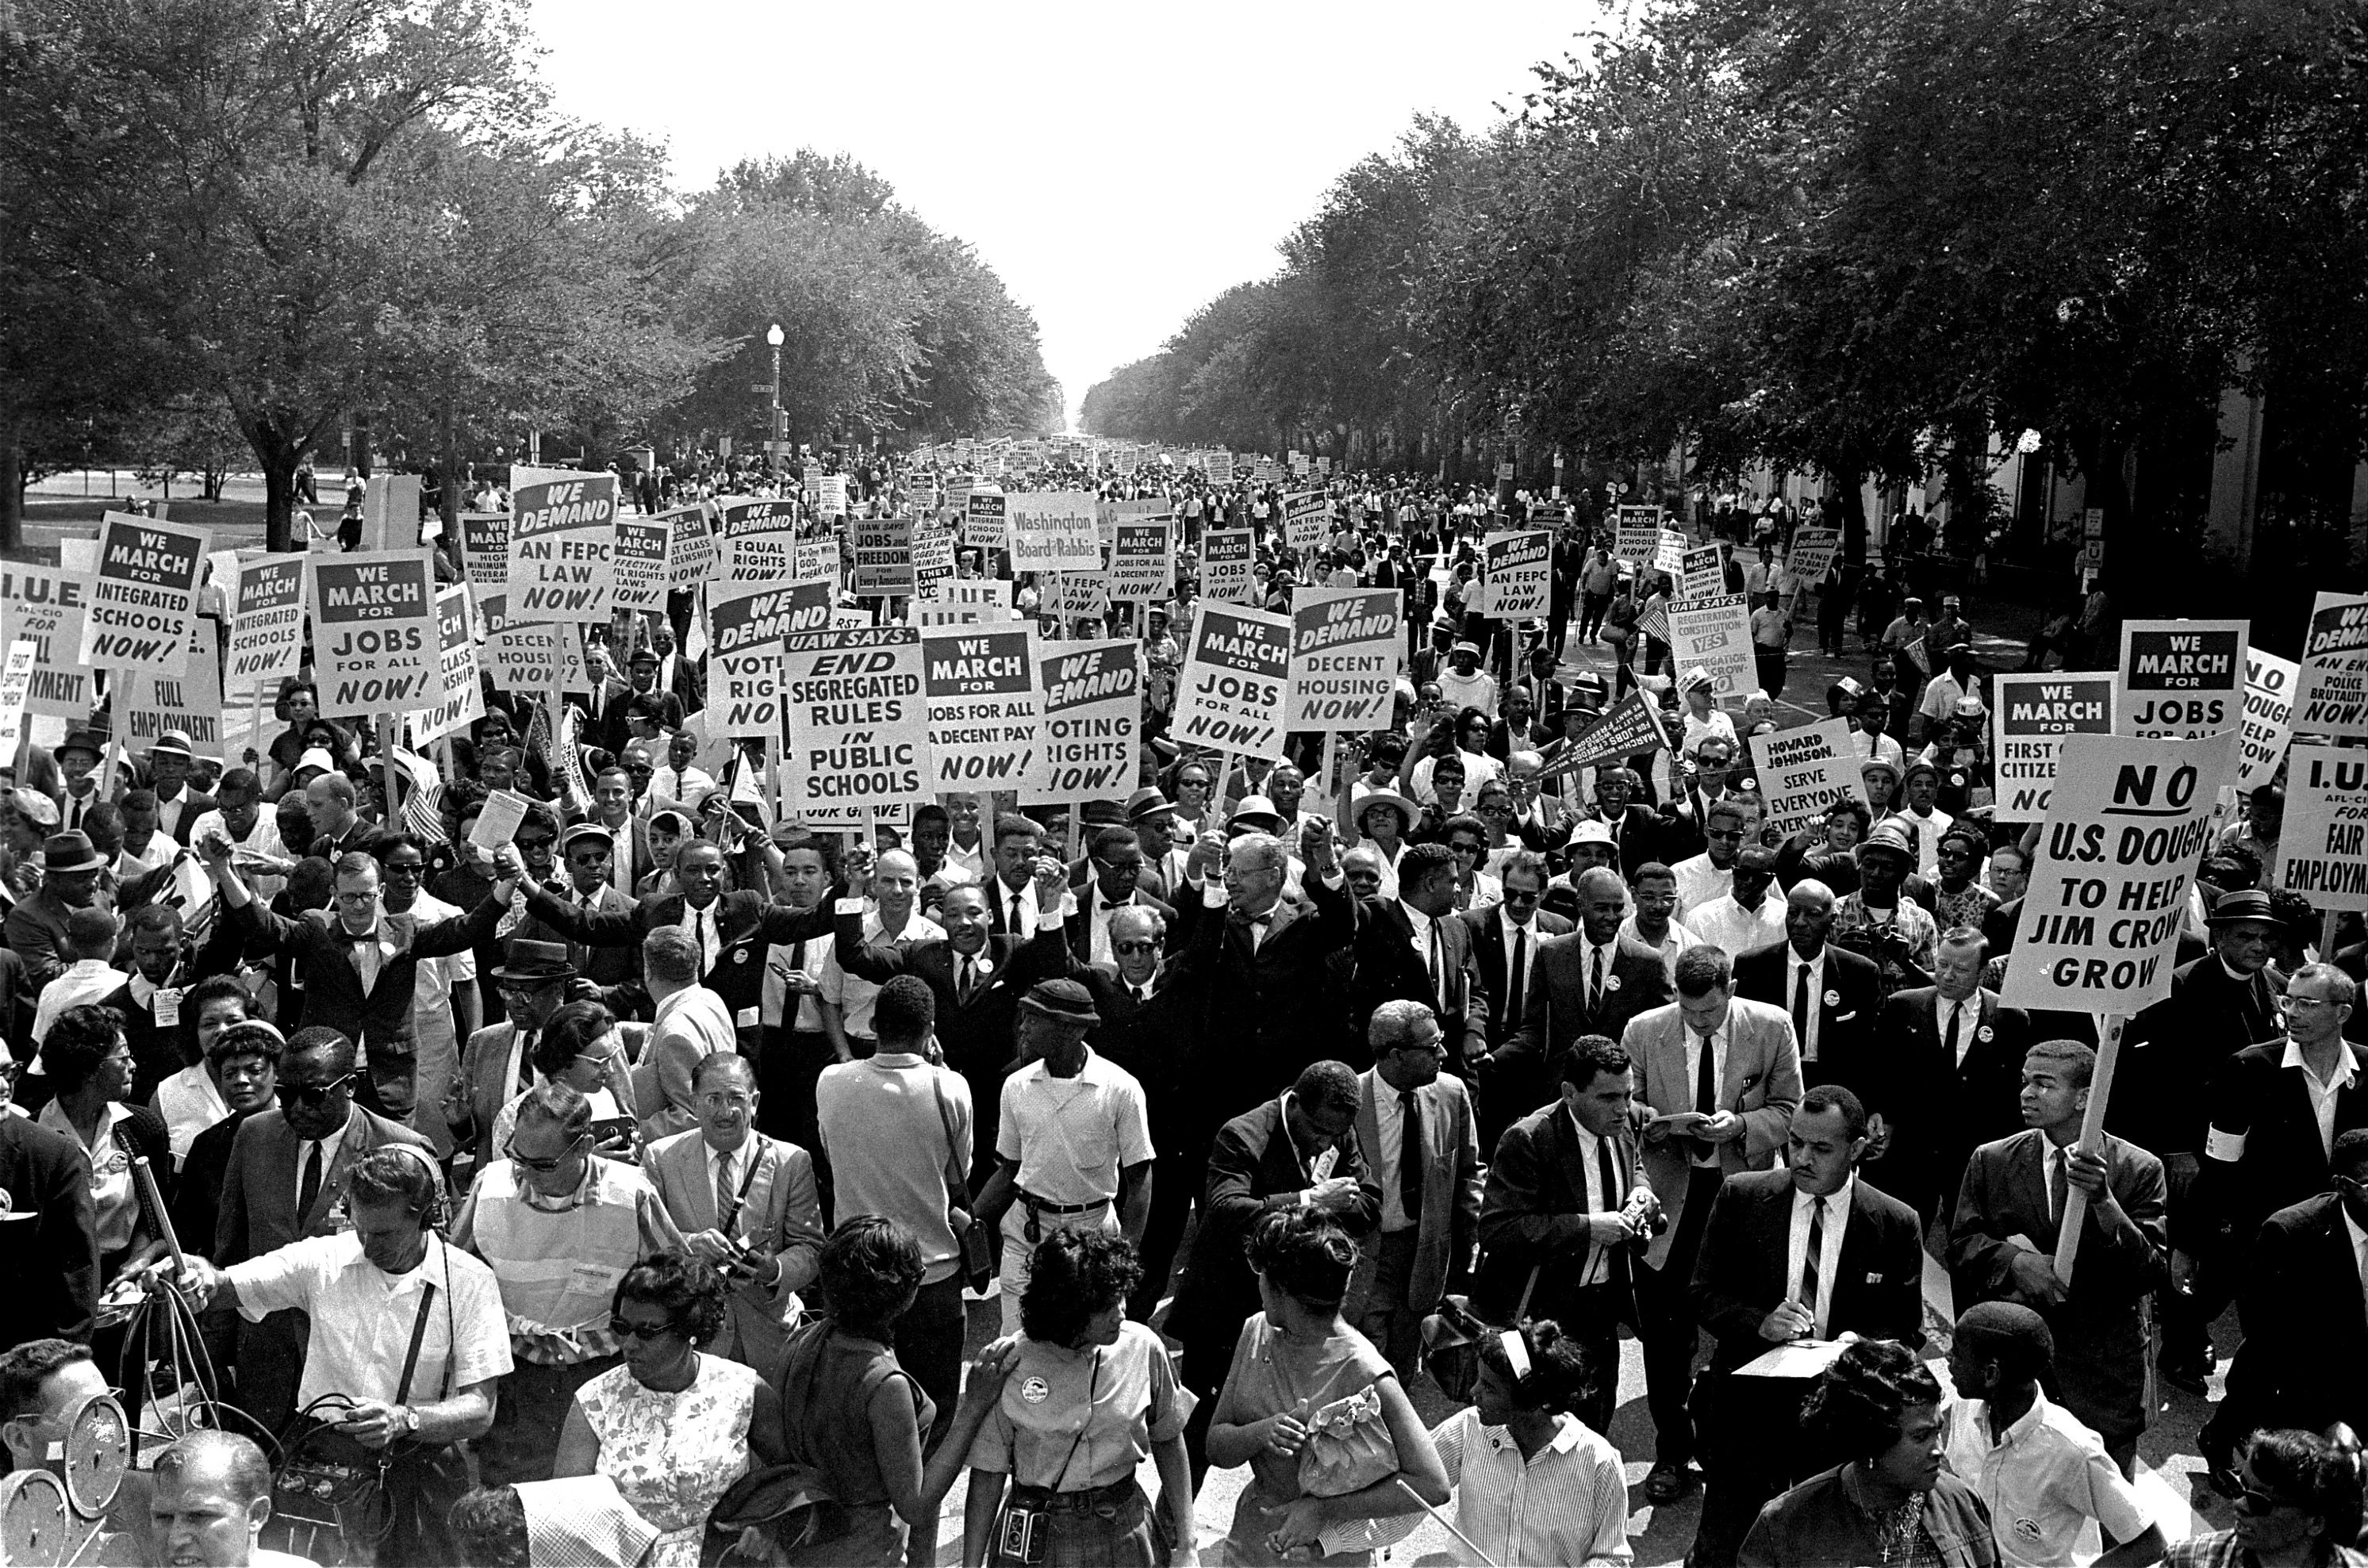 FILE - Martin Luther King Jr., center left with arms raised, marches along Constitution Avenue with other civil rights protestors carrying placards, from the Washington Monument to the Lincoln Memorial during the March on Washington on Aug. 28, 1963. (AP Photo)